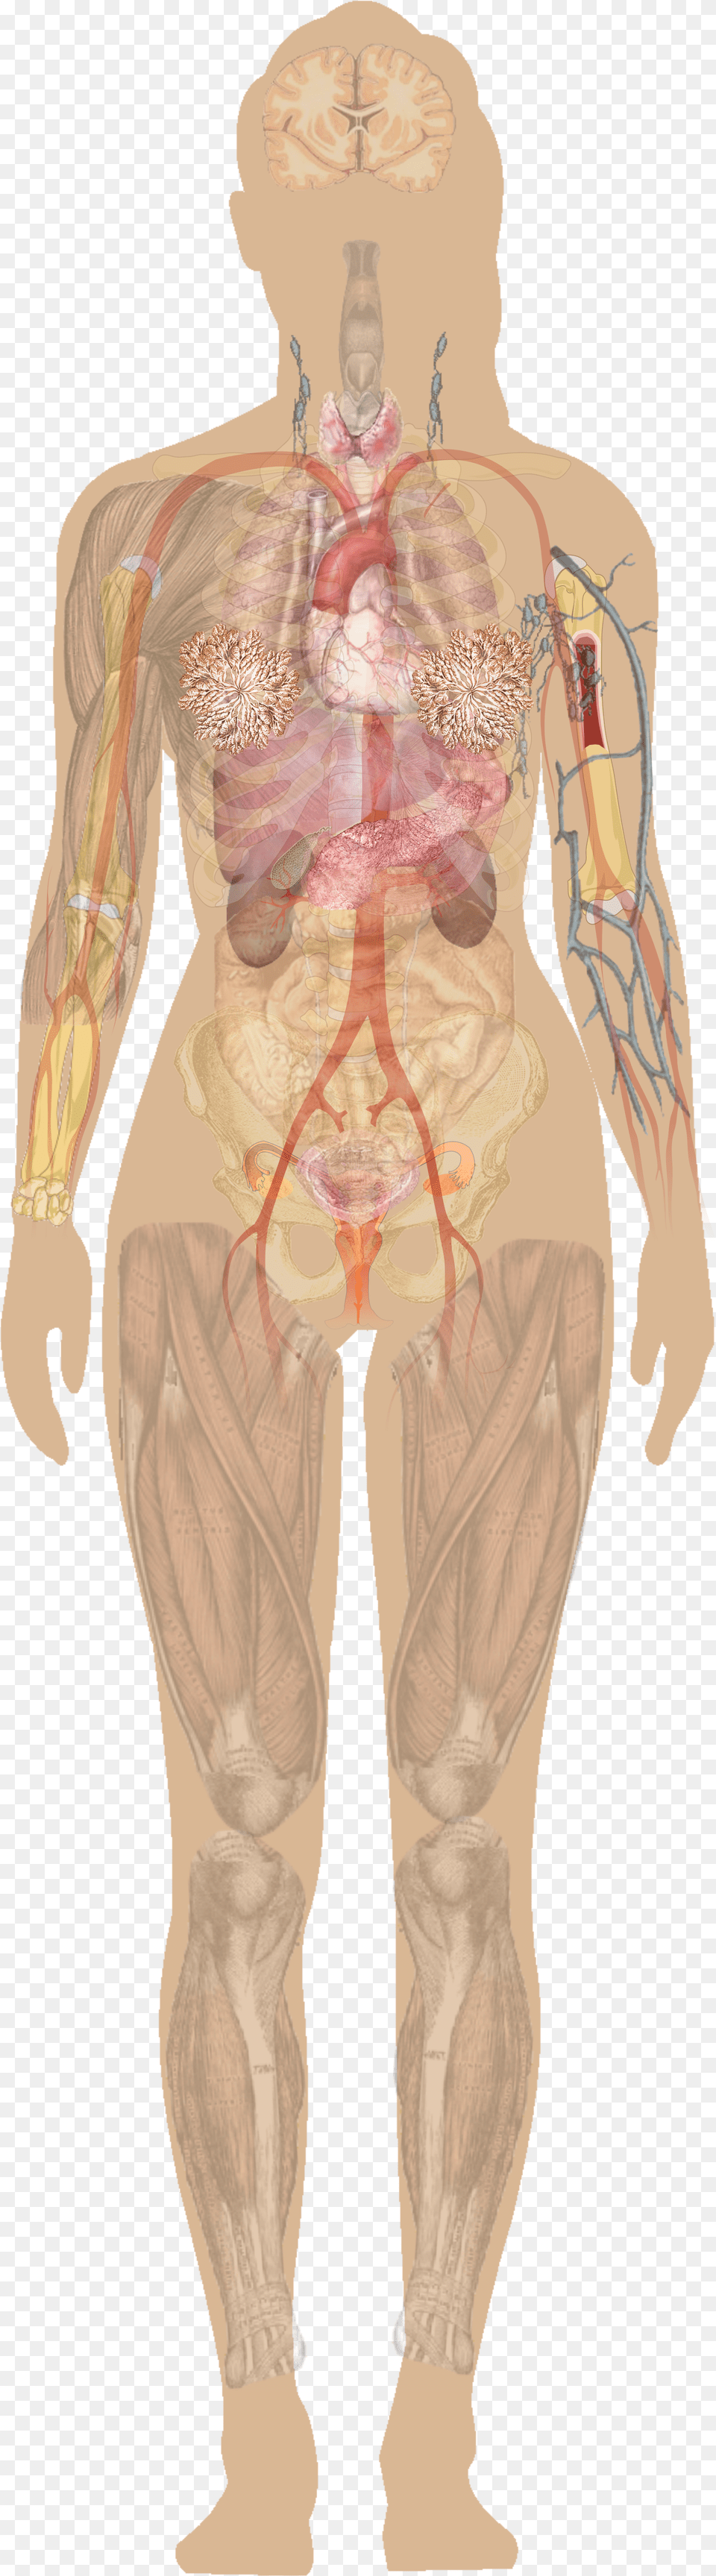 Transparent Muscular System Human Diagram Without Labels Png Image